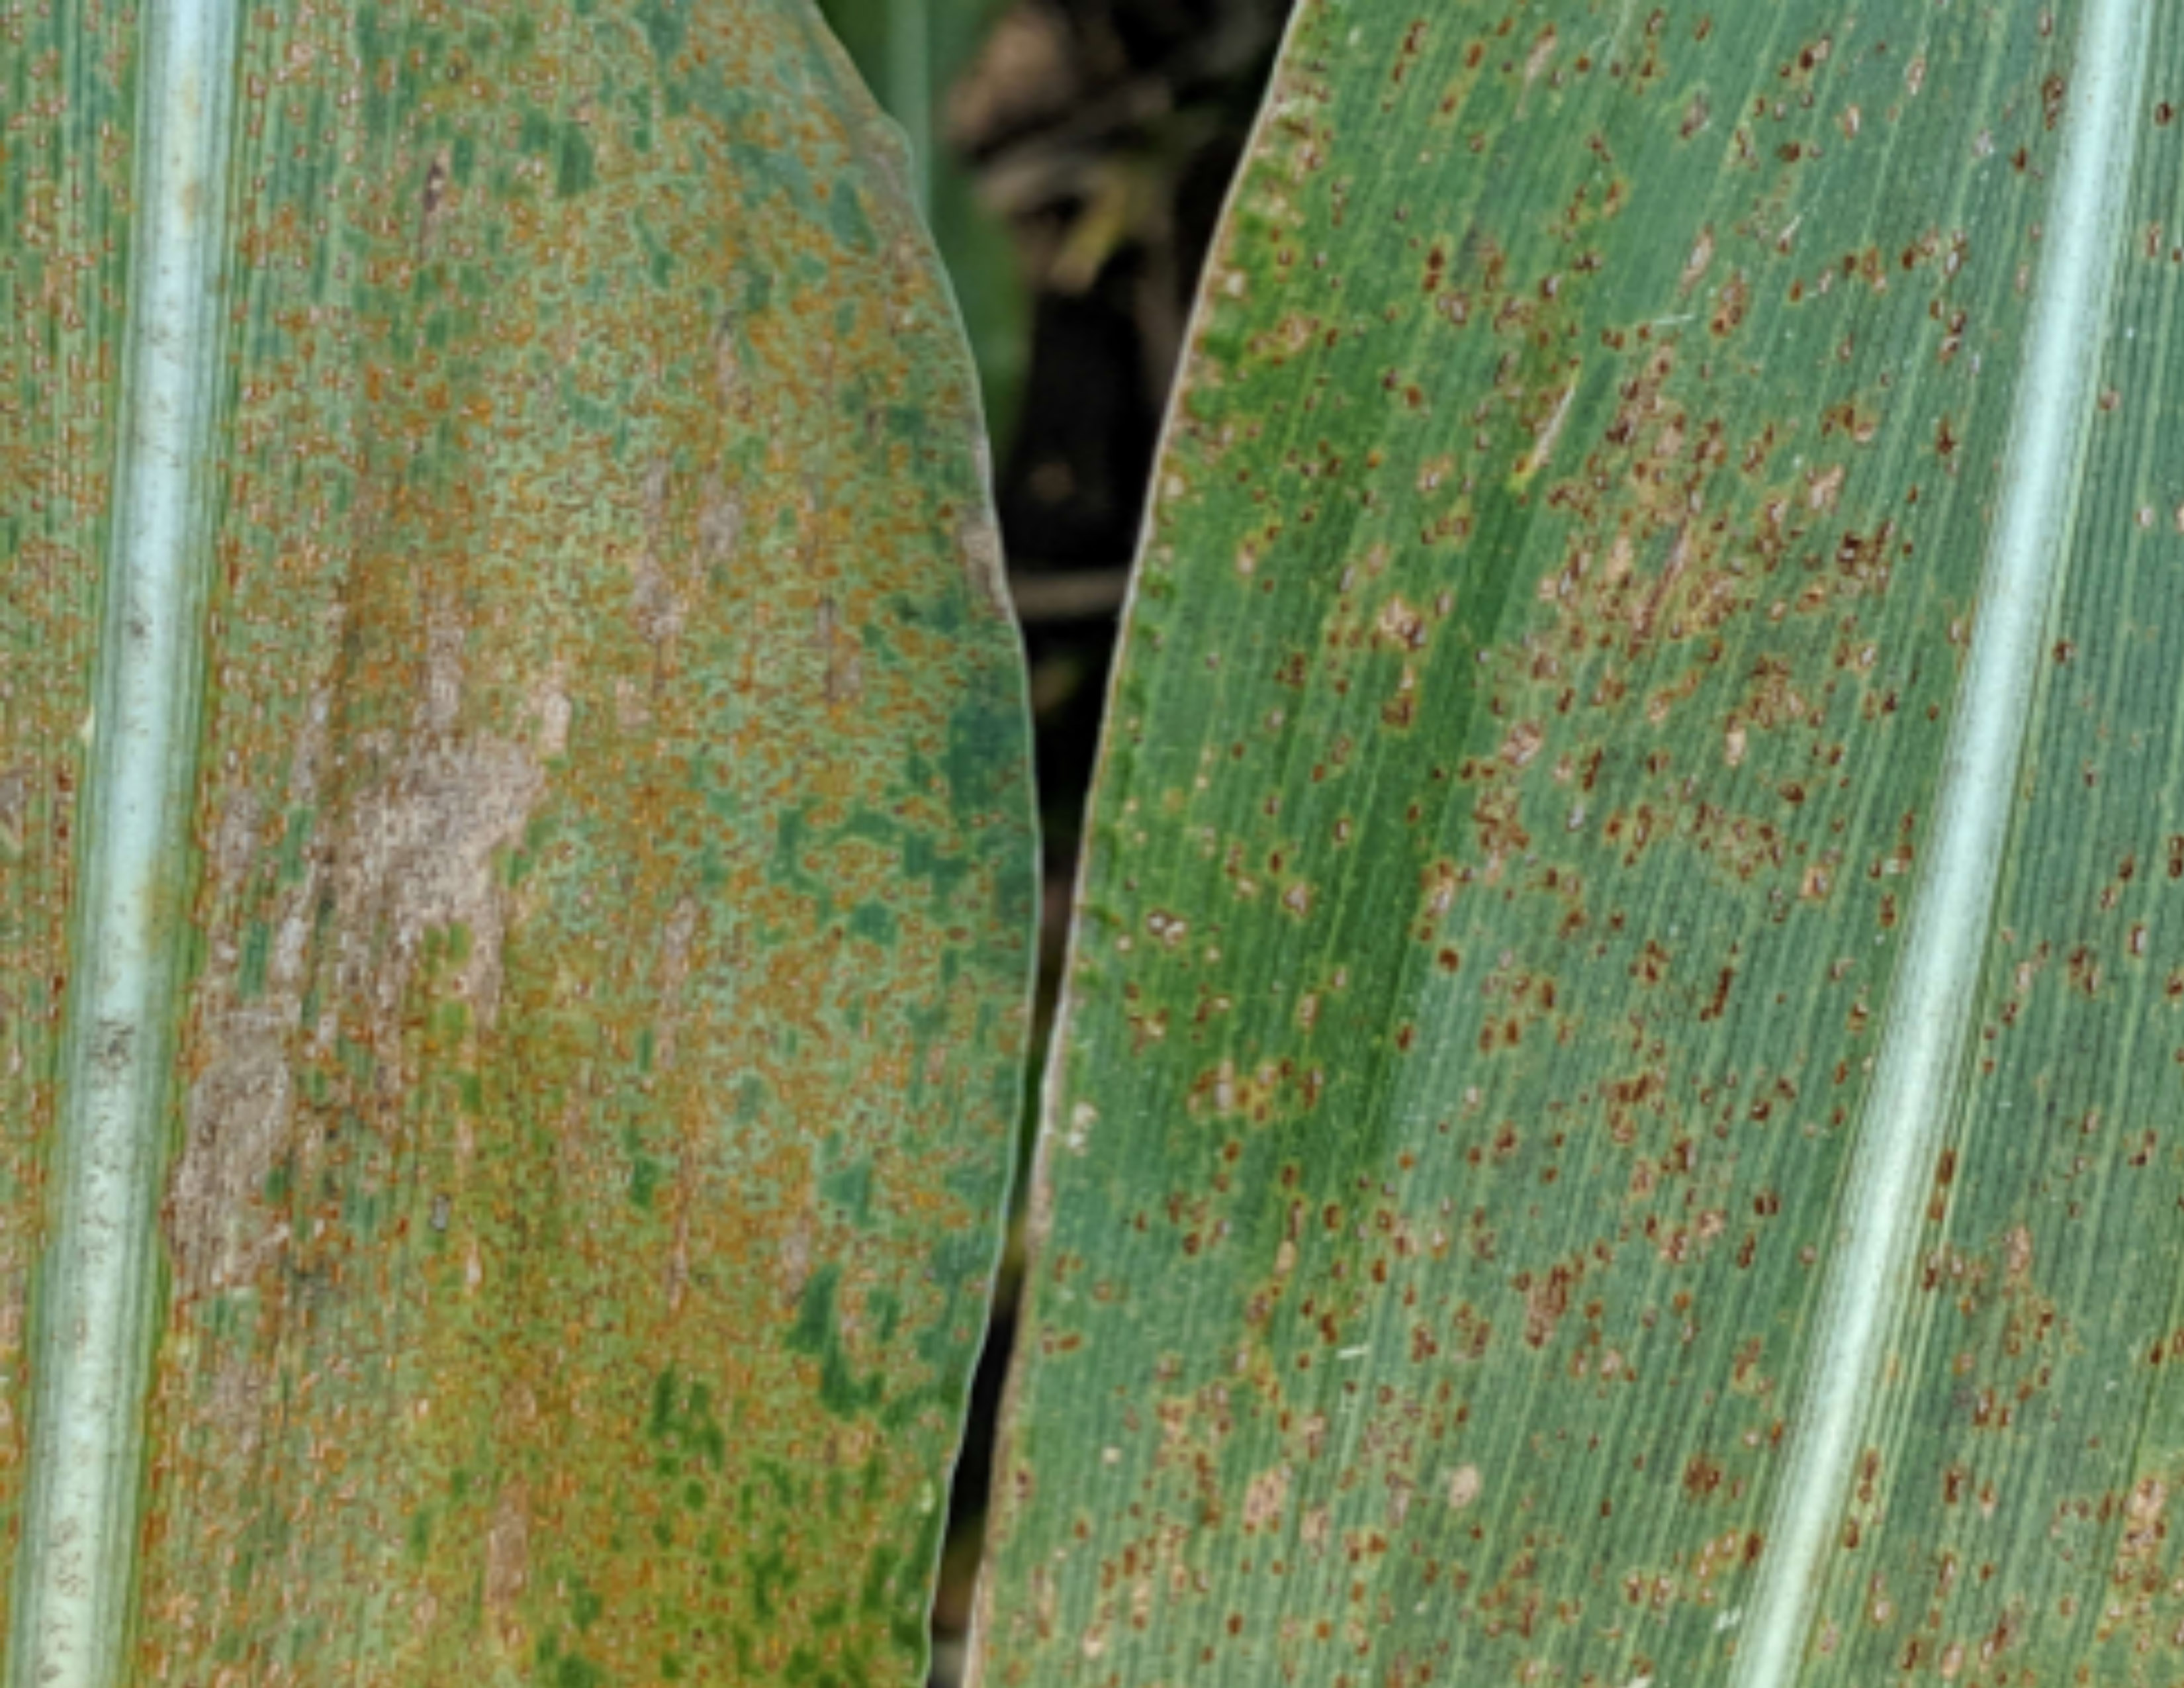 Two leaves of corn, one showing signs of Southern Rust, the other with Common Rust.